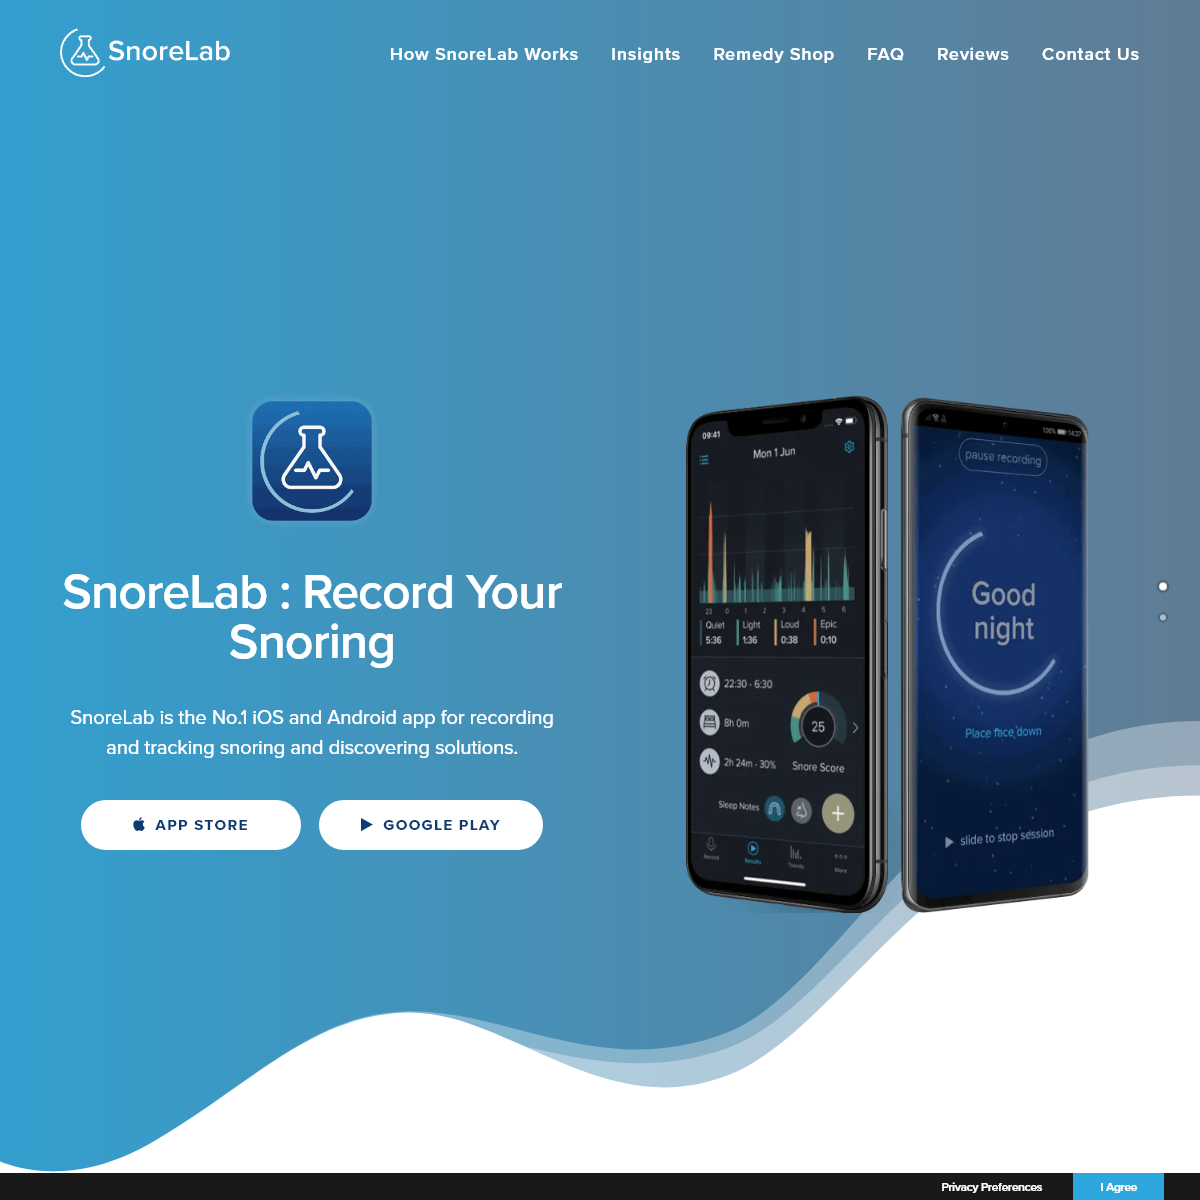 A complete backup of snorelab.com